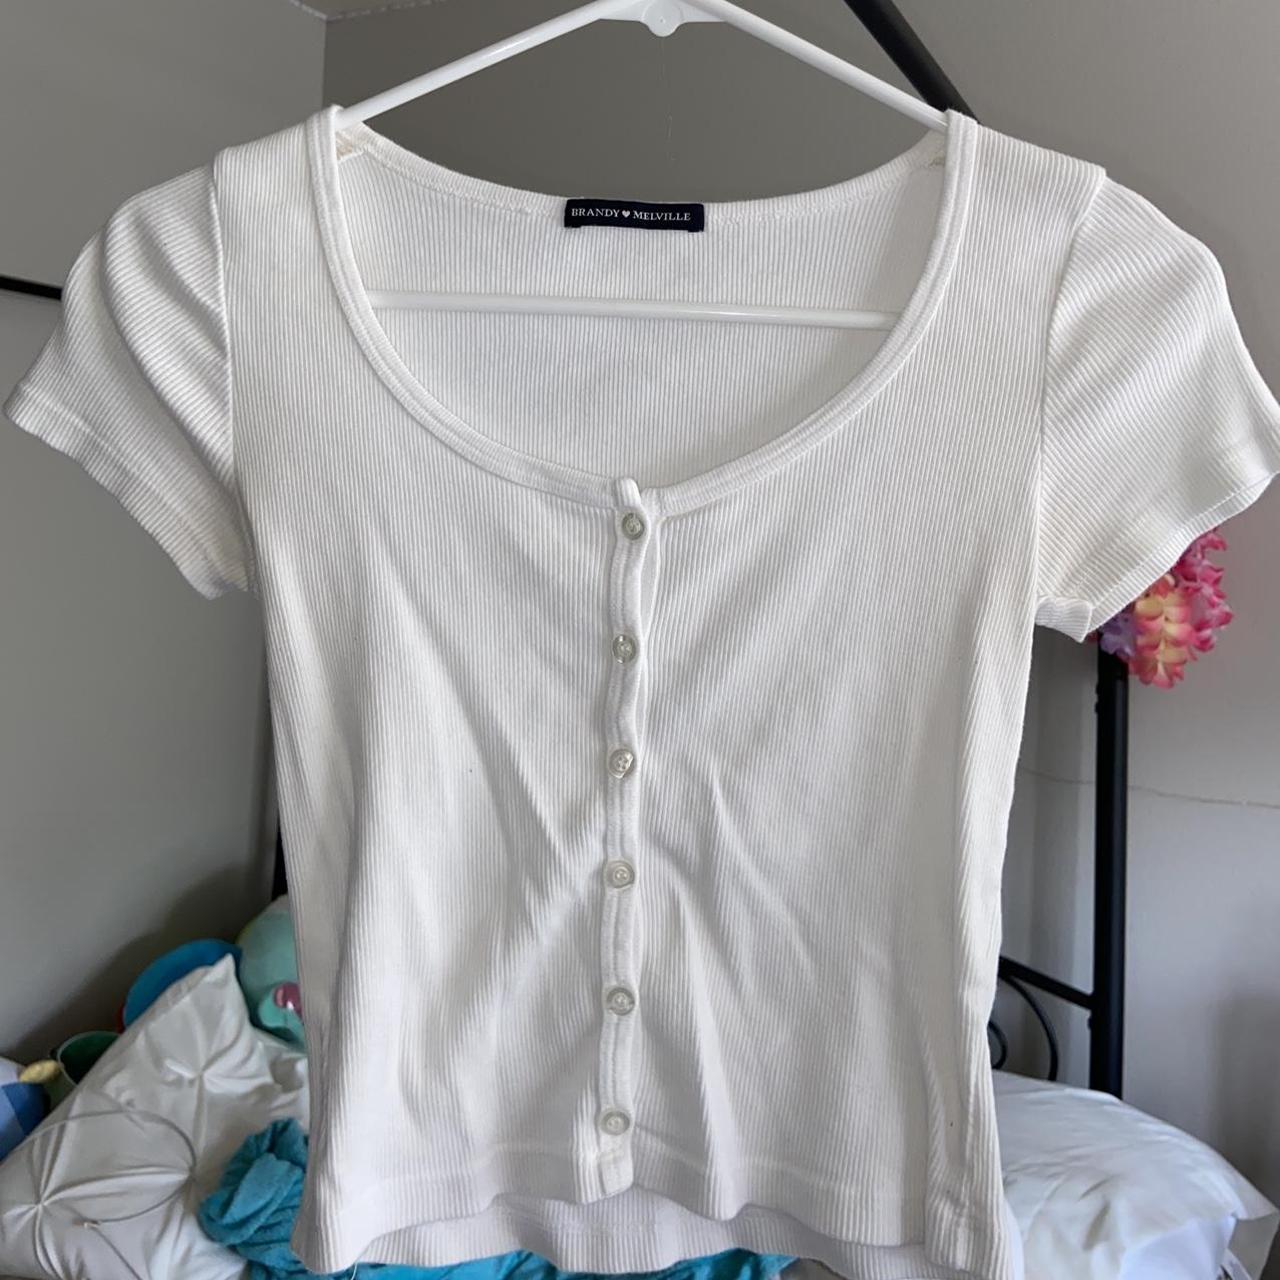 brandy melville zelly top ╰(*´︶`*)╯♡, one size, can